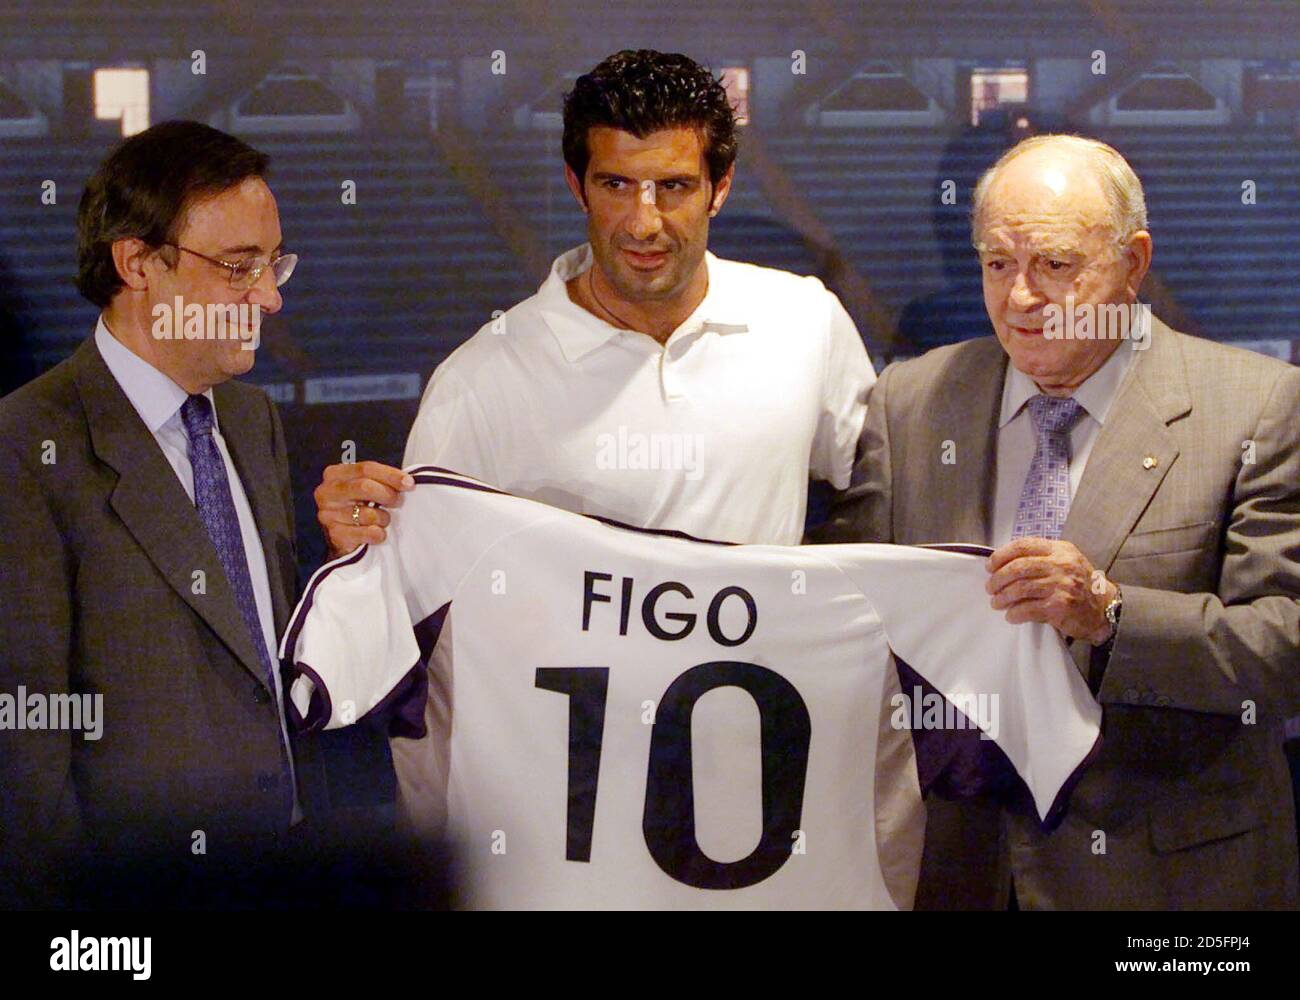 Portuguese player Luis Figo holds the Real Madrid shirt along with club  President Florentino Perez (L) and soccer legend Alfredo Di'Stefano (R) at  his presentation in Bernabeu stadium July 24. Figo, who